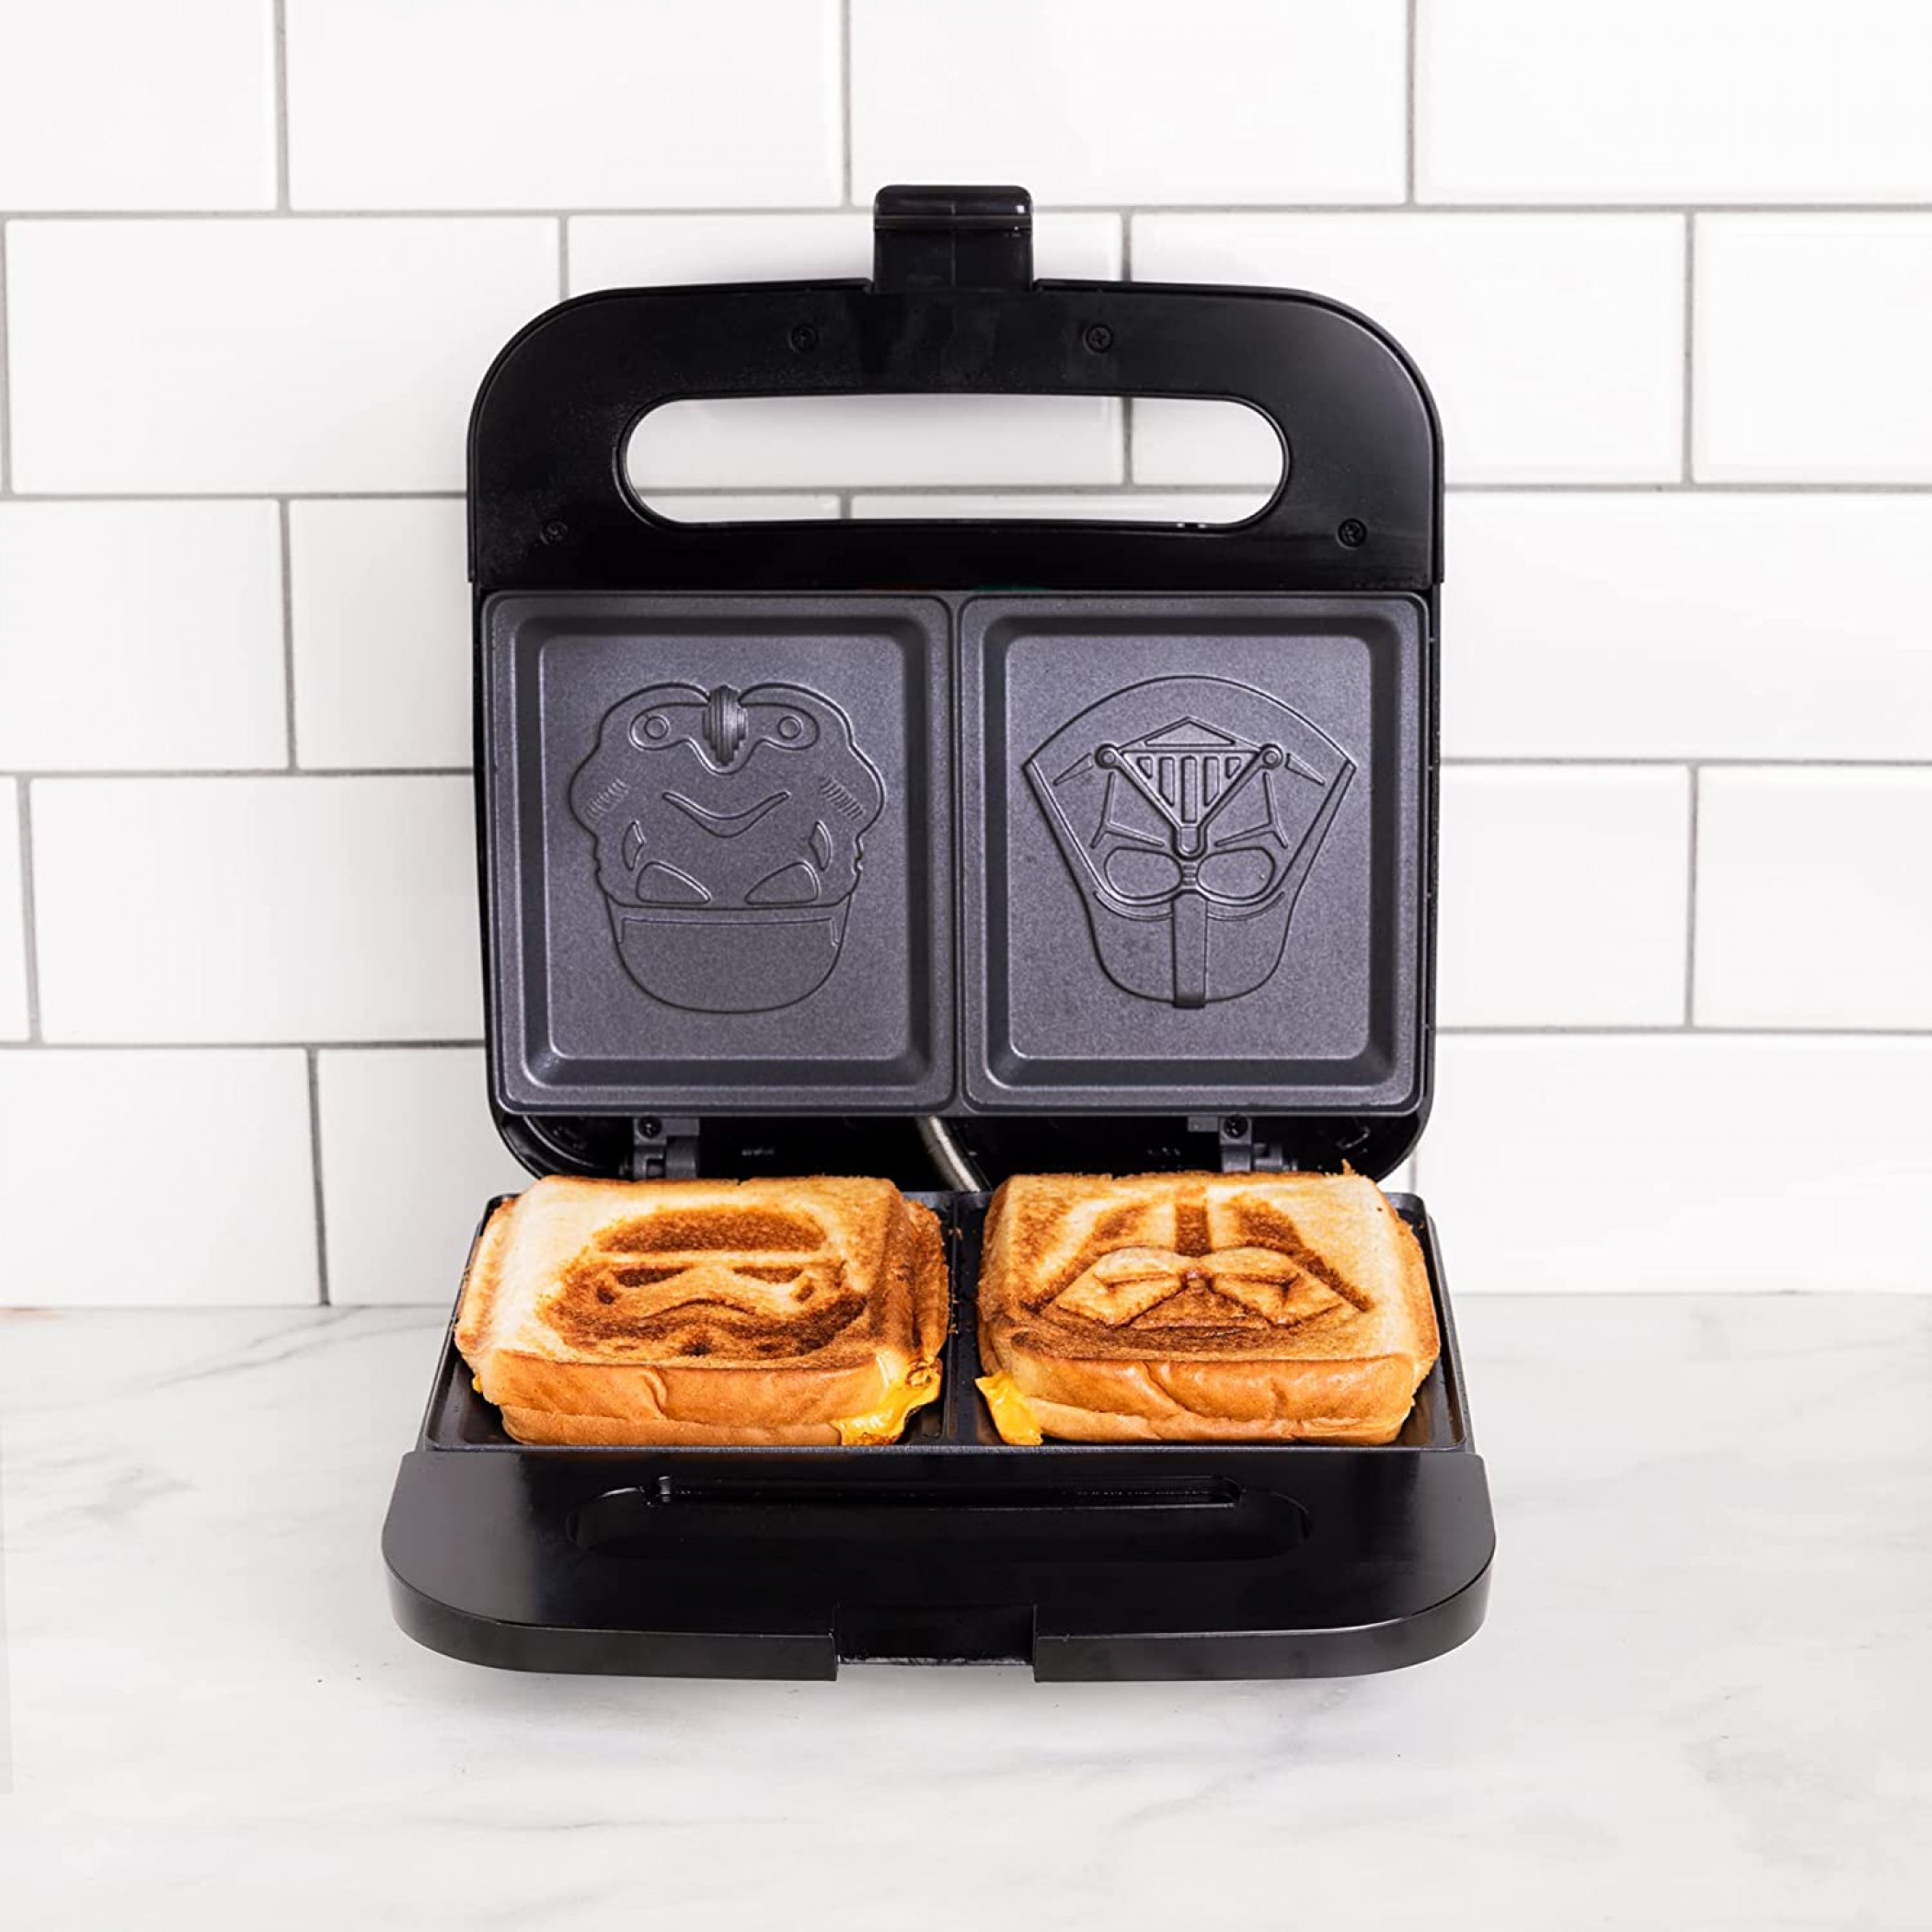 Star Wars Darth Vader and Stormtroopers Grilled Cheese Maker